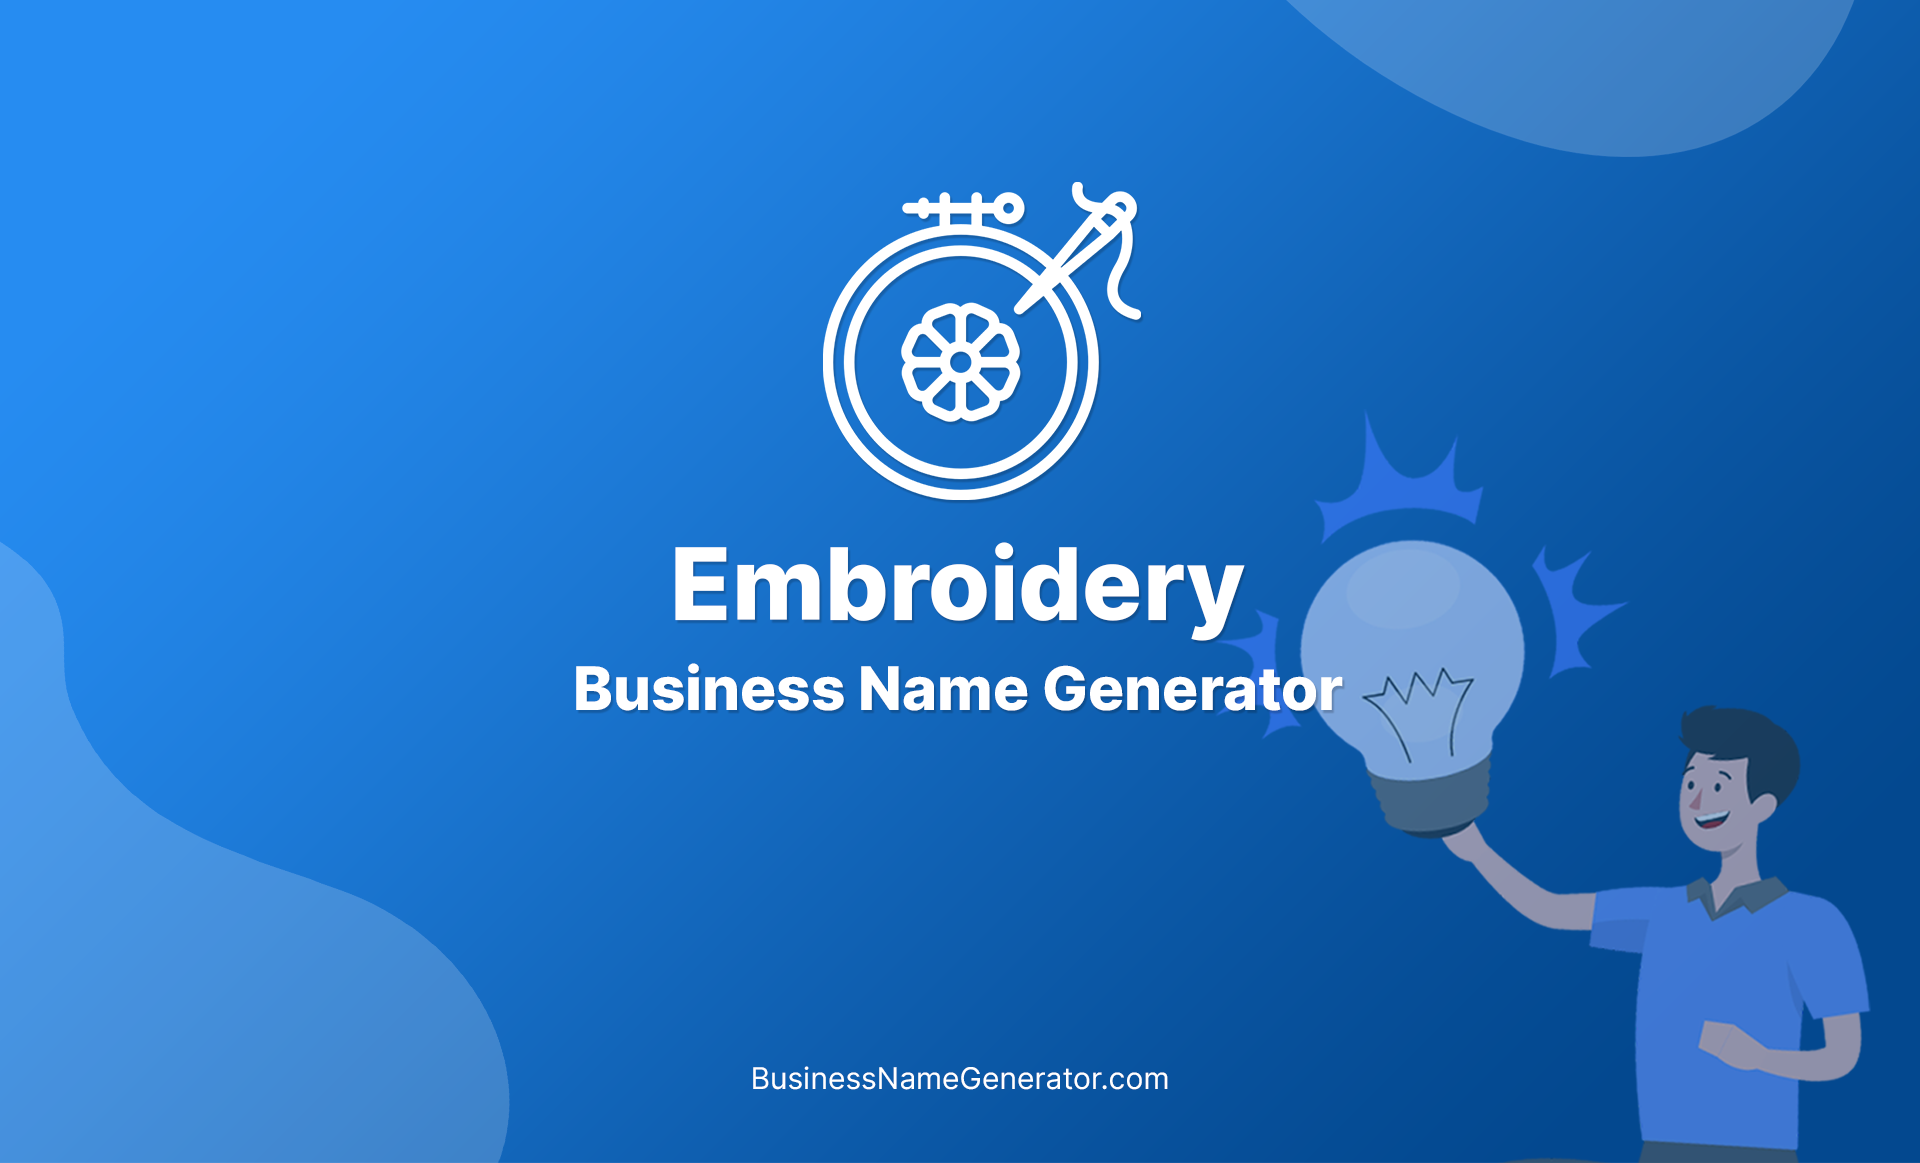 Embroidery Business Name Generator